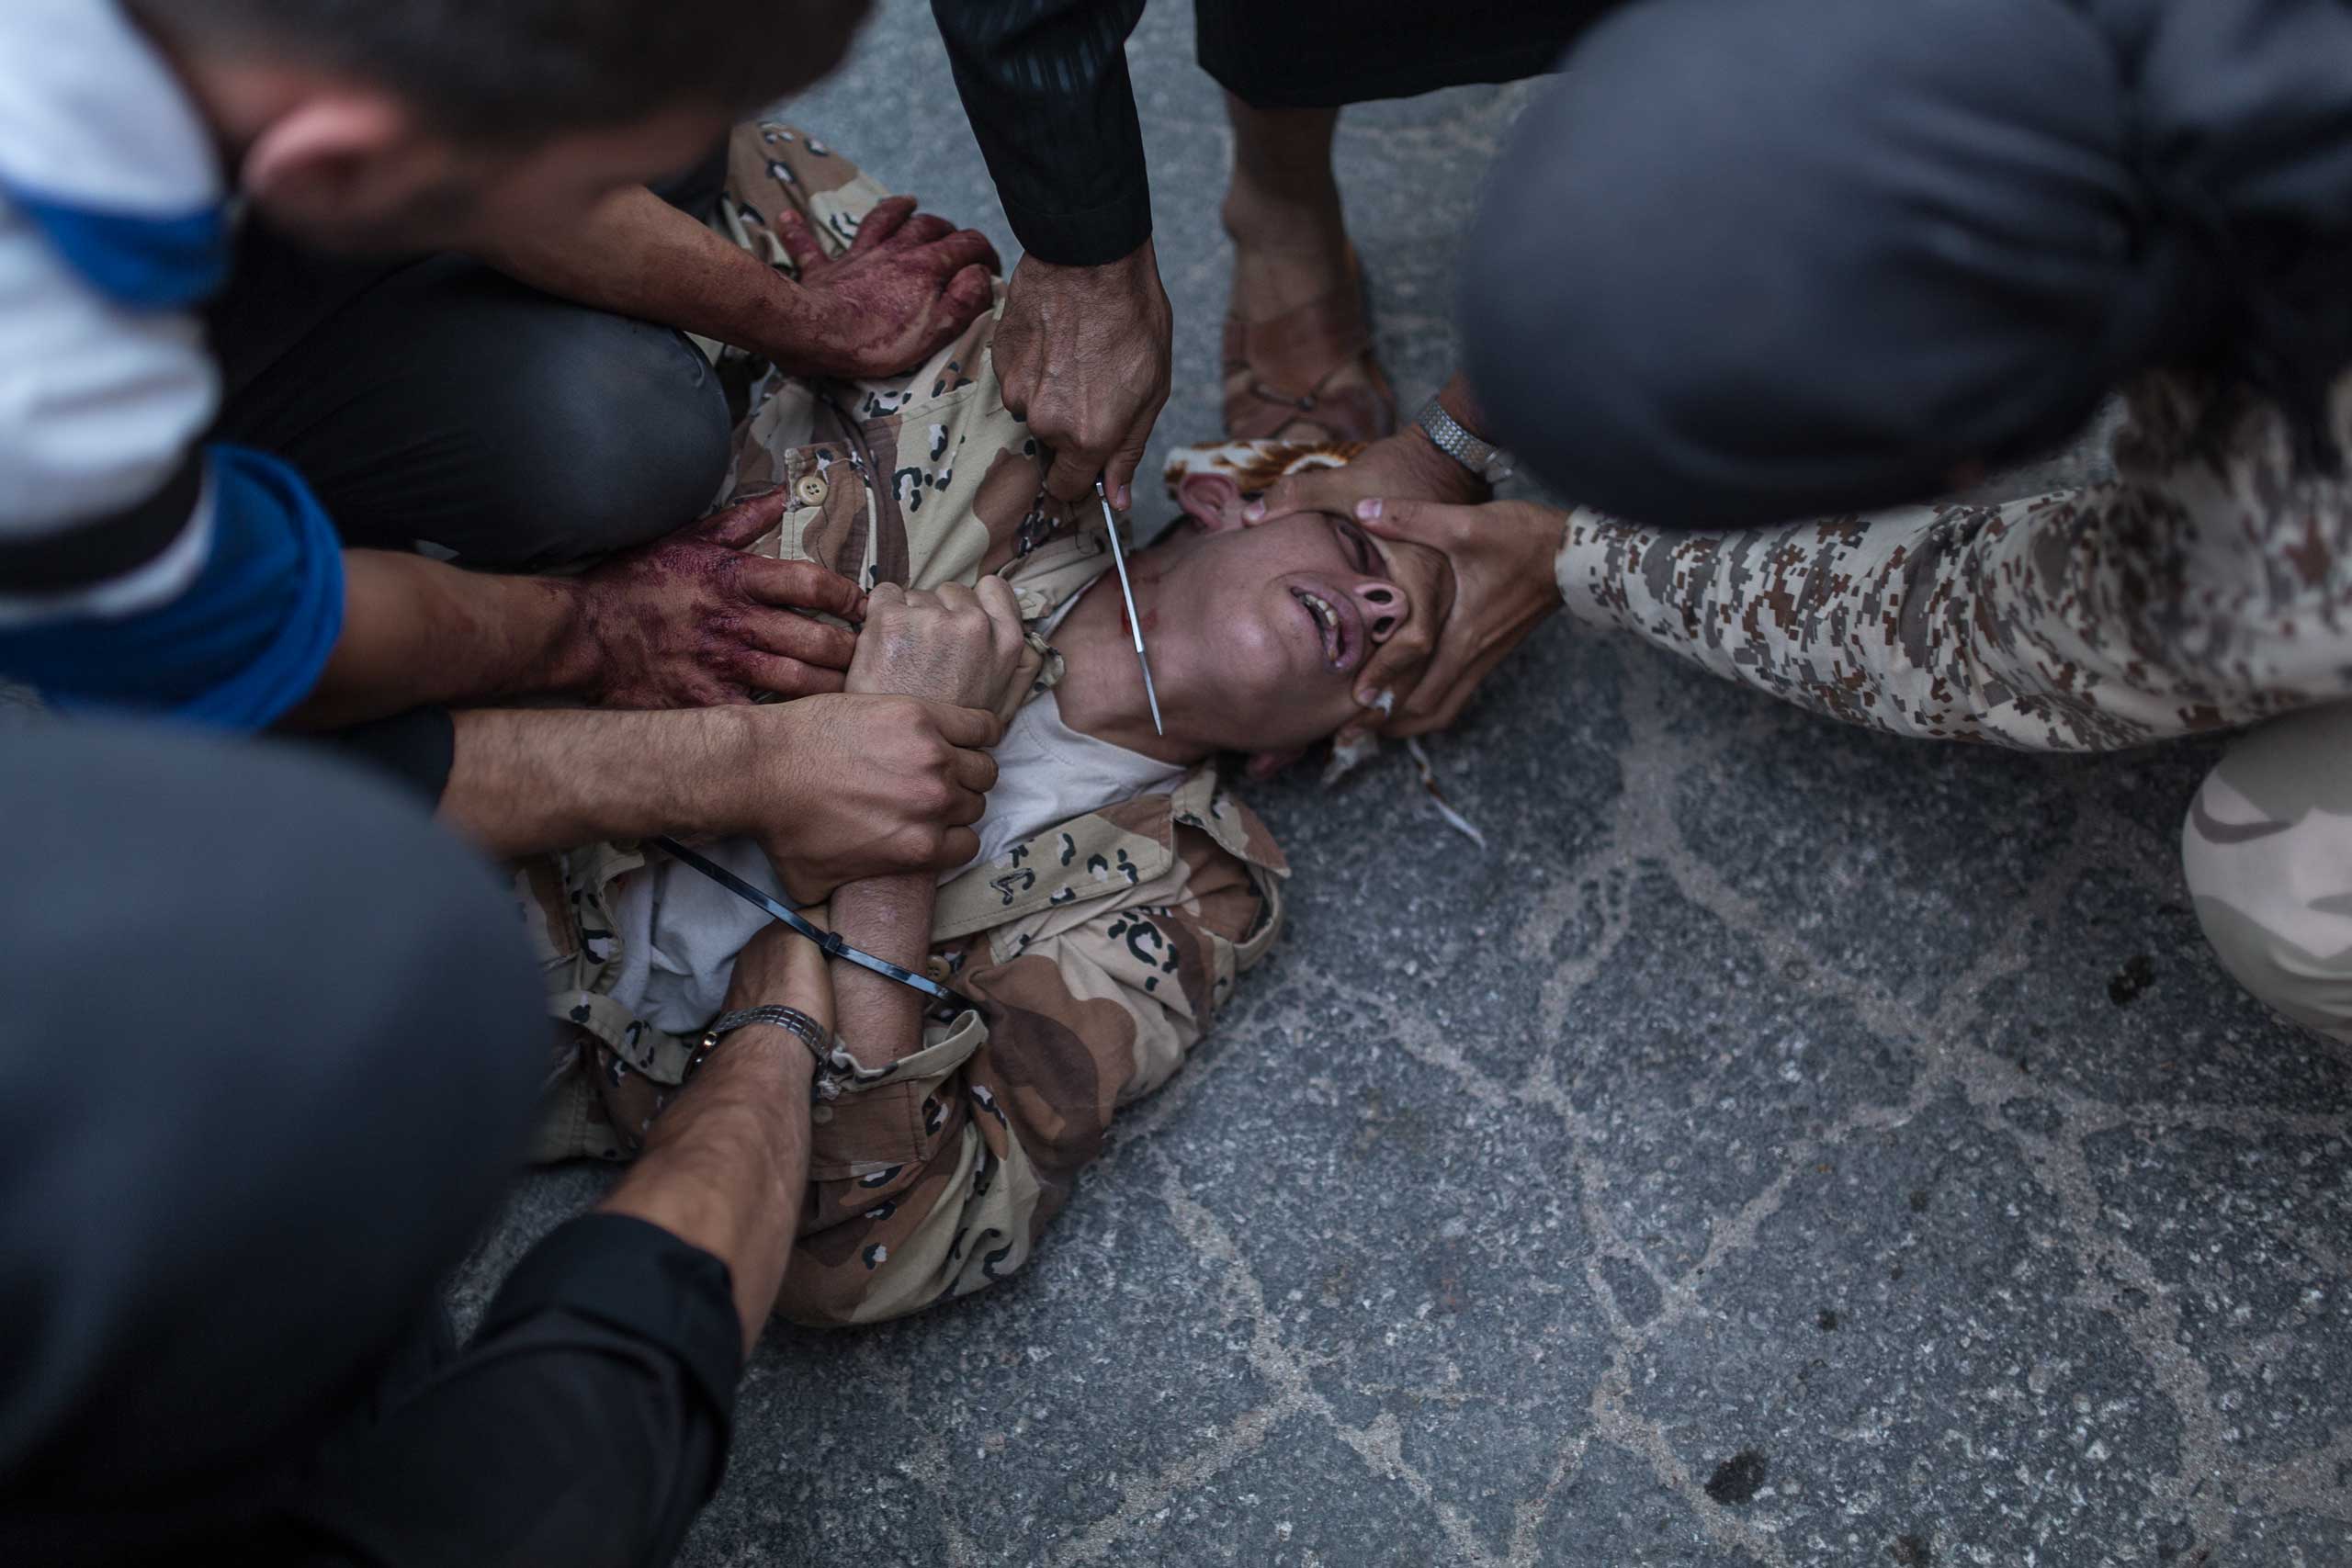 A young Syrian man is executed by ant-regime rebels in the town of Keferghan, near Aleppo, on August 31, 2013.